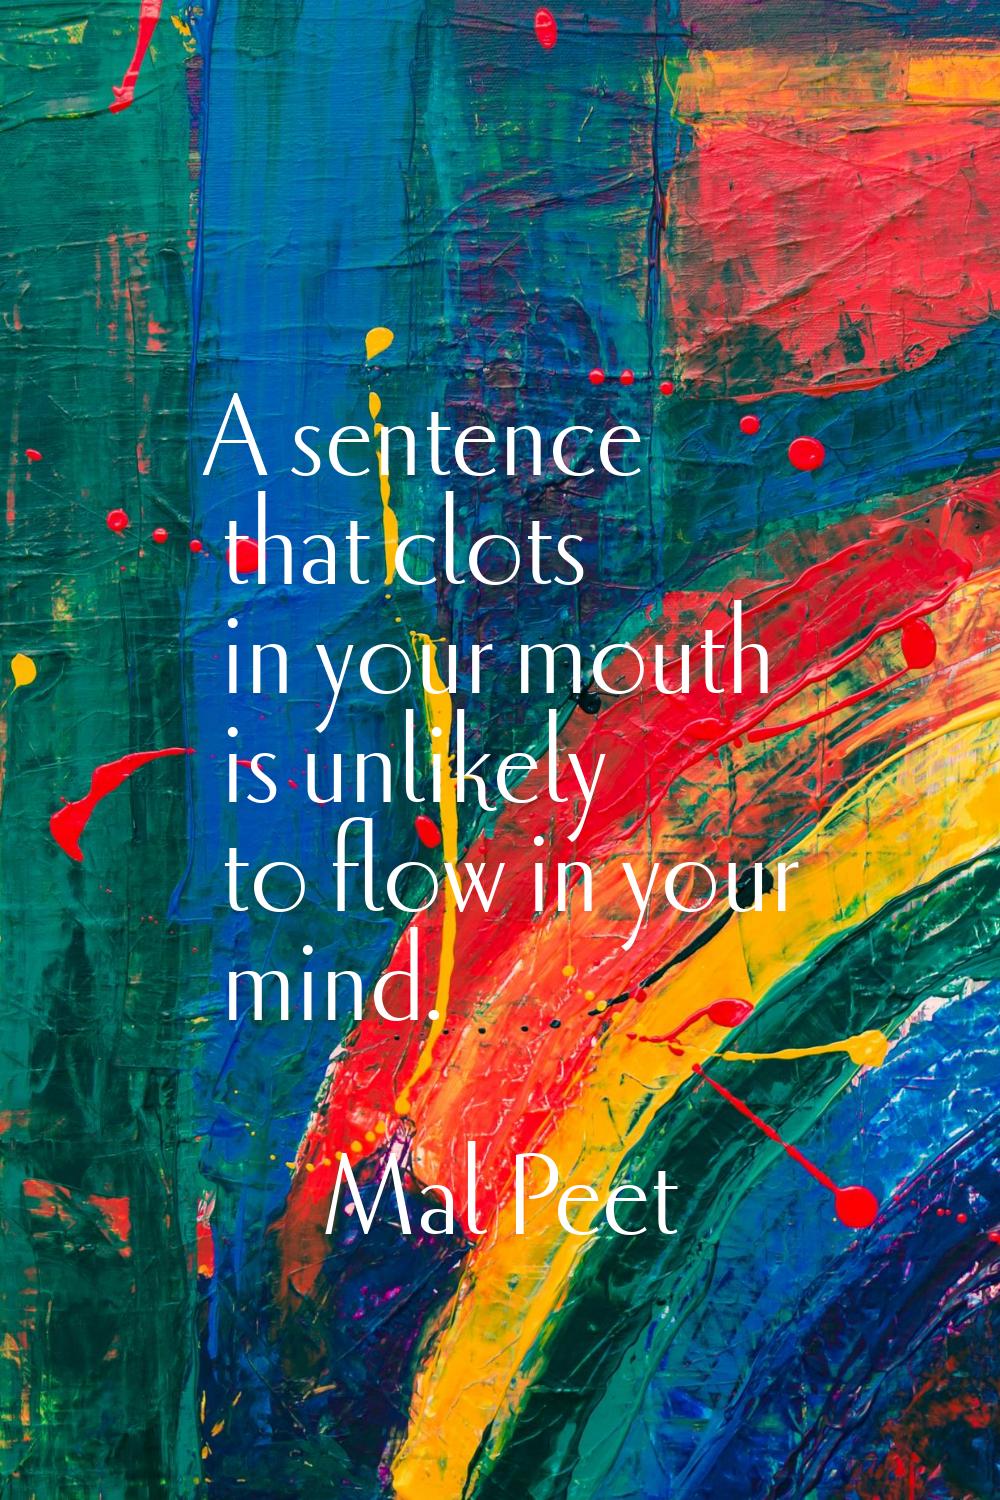 A sentence that clots in your mouth is unlikely to flow in your mind.